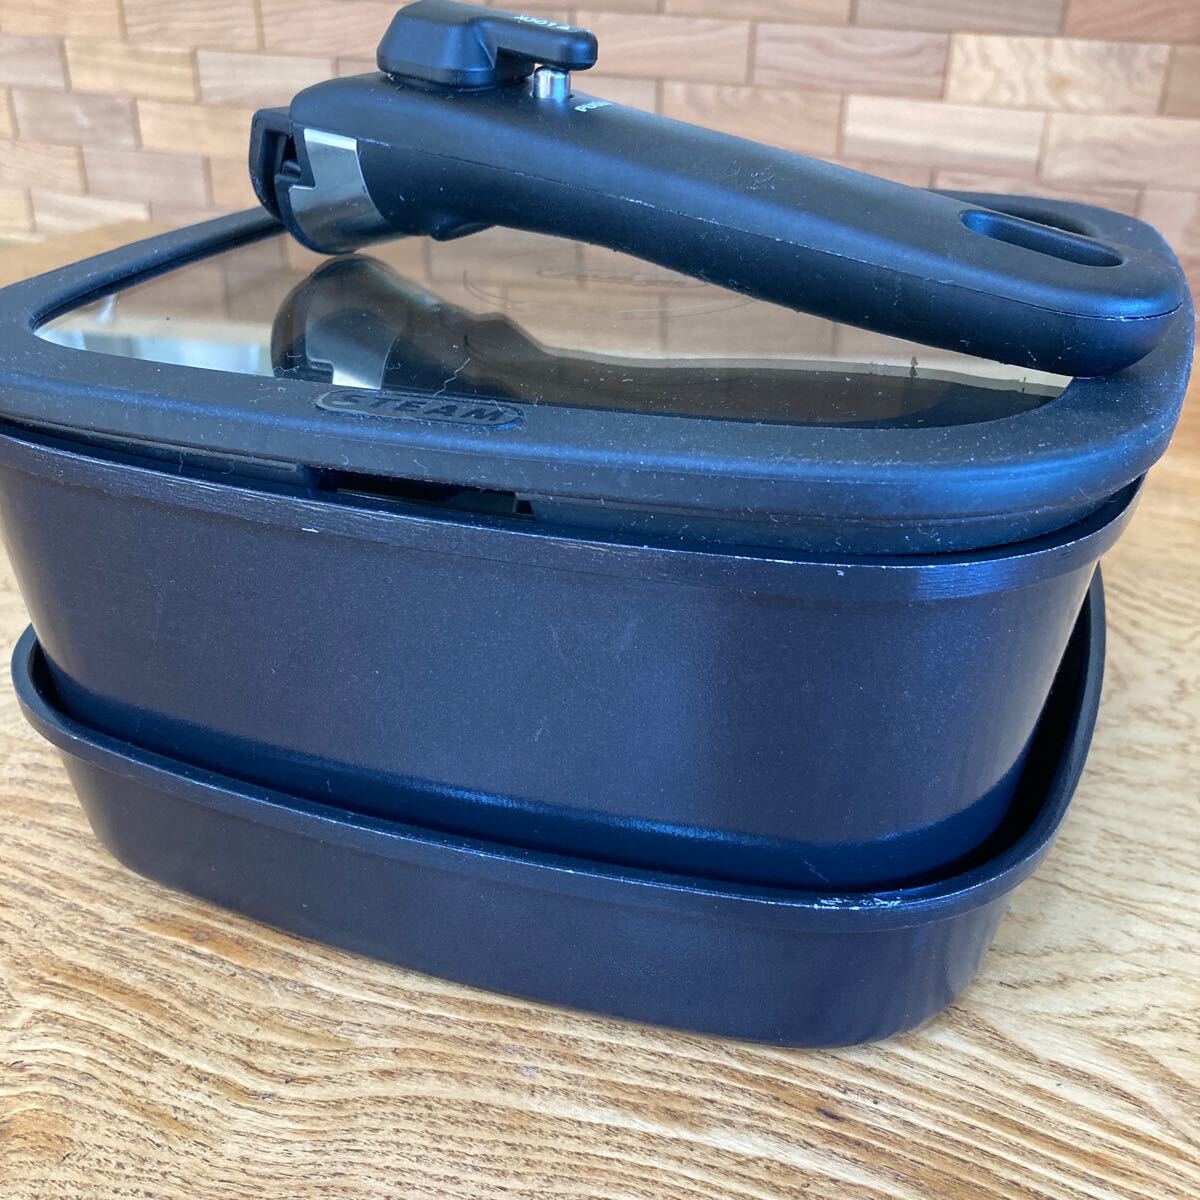 BoOh!gle (boogru) 6 point set used IH& gas fire correspondence four angle saucepan fry pan grill pan cover attaching handle . taking . non stick 